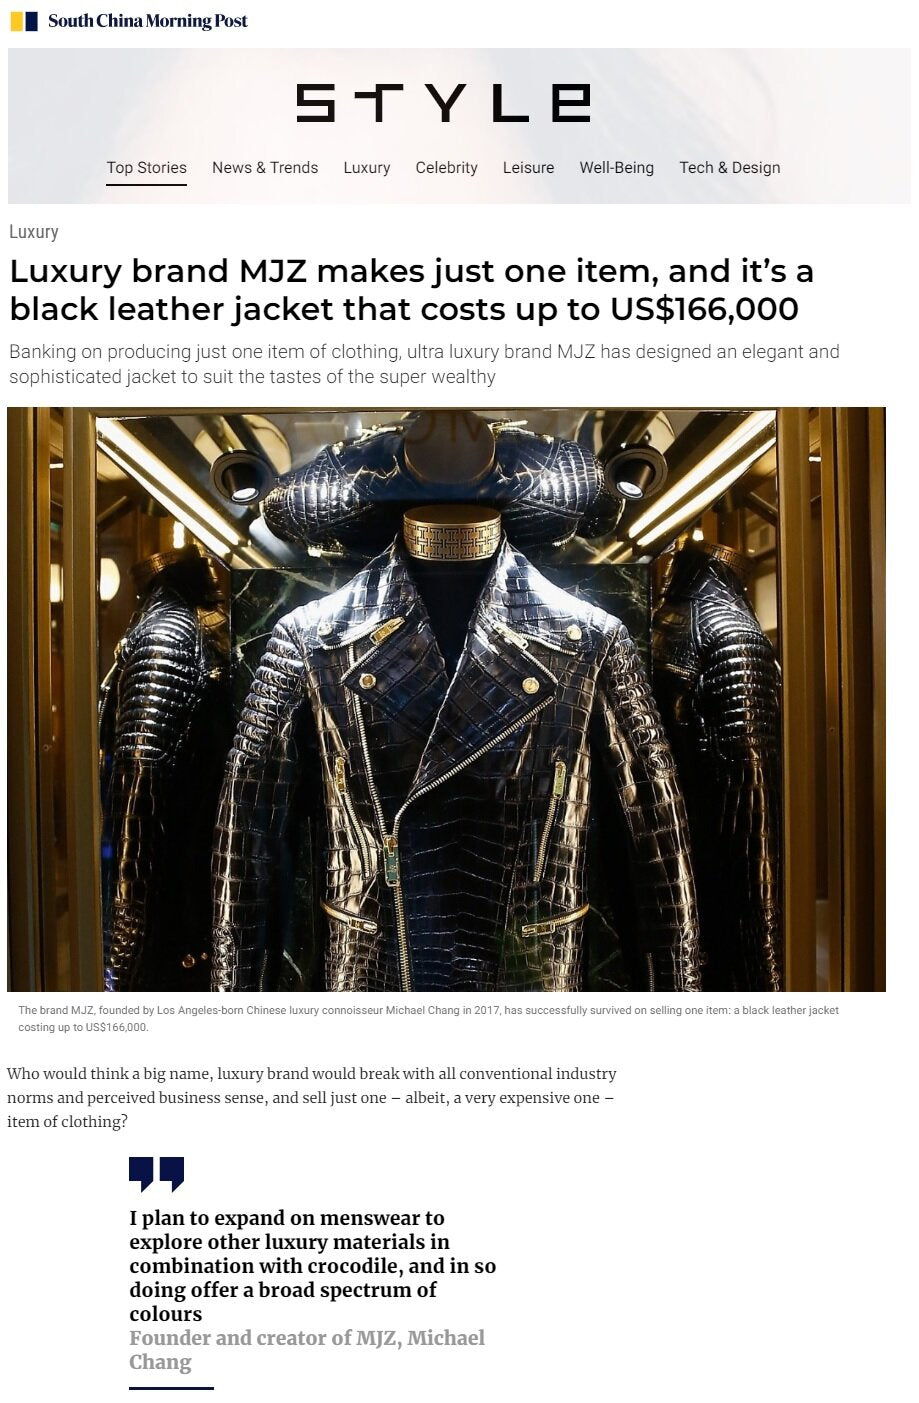 Luxury brand MJZ makes just one item, and it's a black leather jacket that  costs up to US$166,000